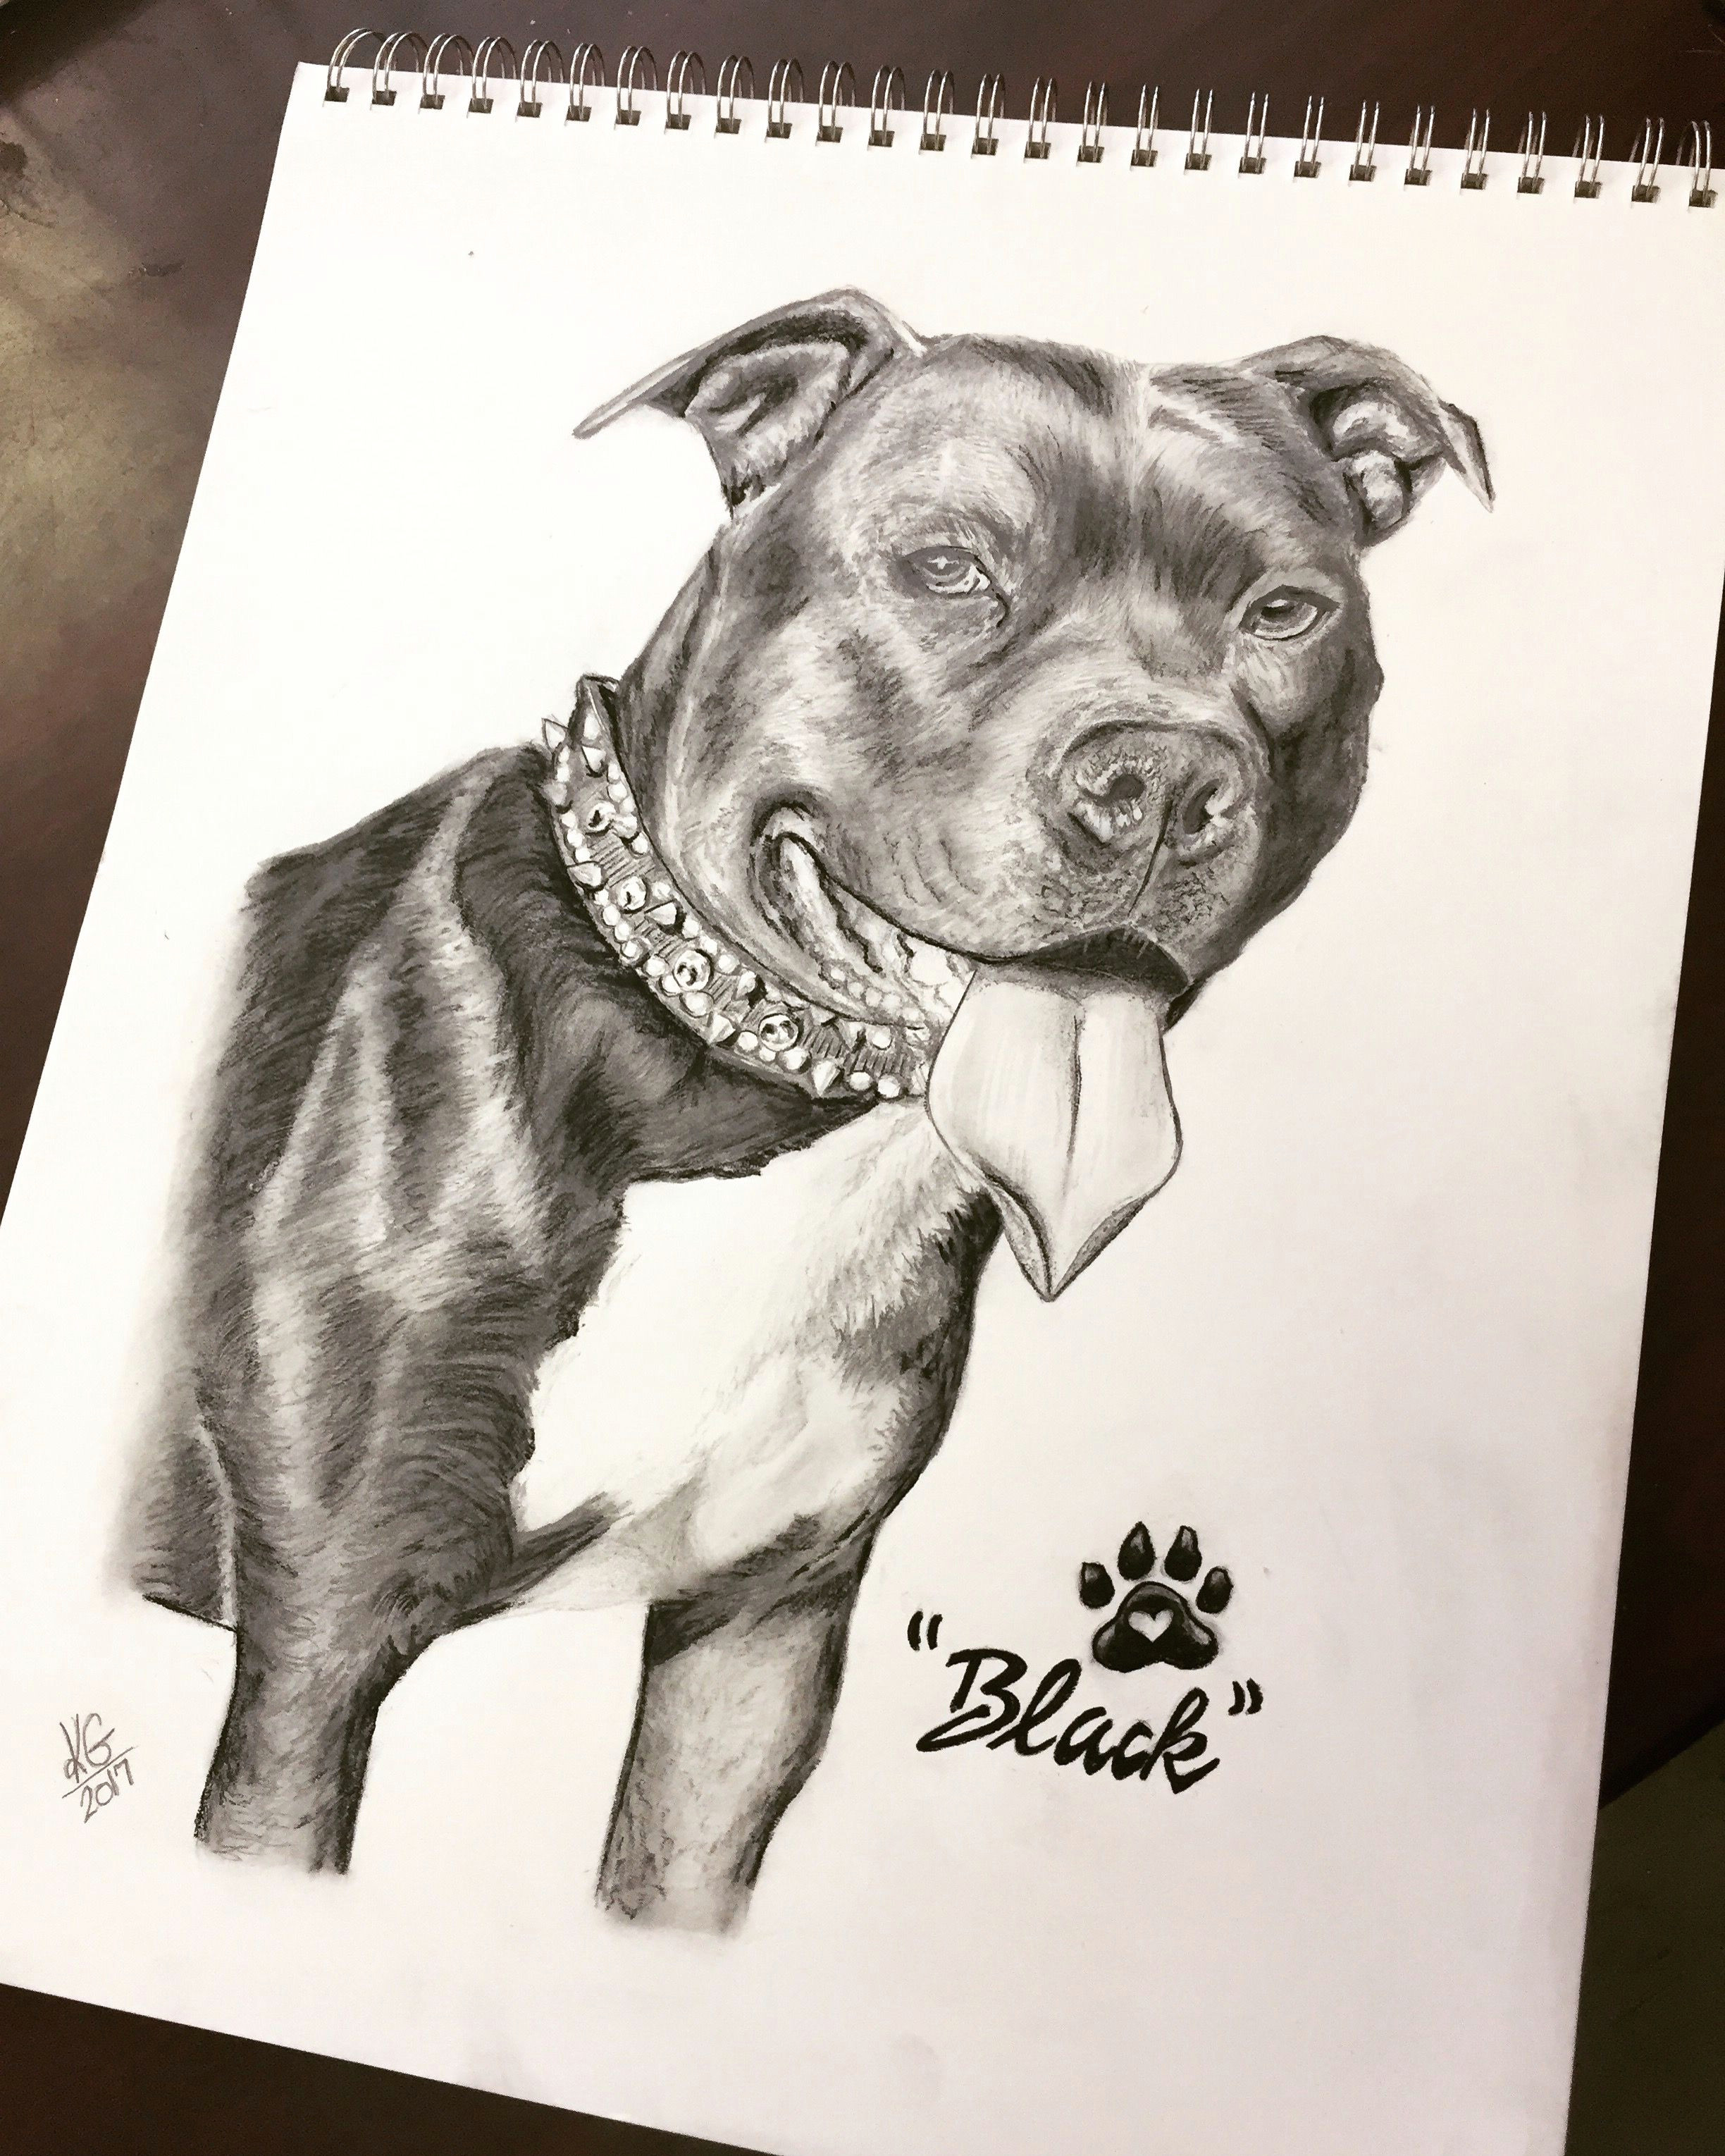 Drawing A Dog Time Lapse Time Lapse Drawing Of A Pit Bull Dog by Karen Governale Www